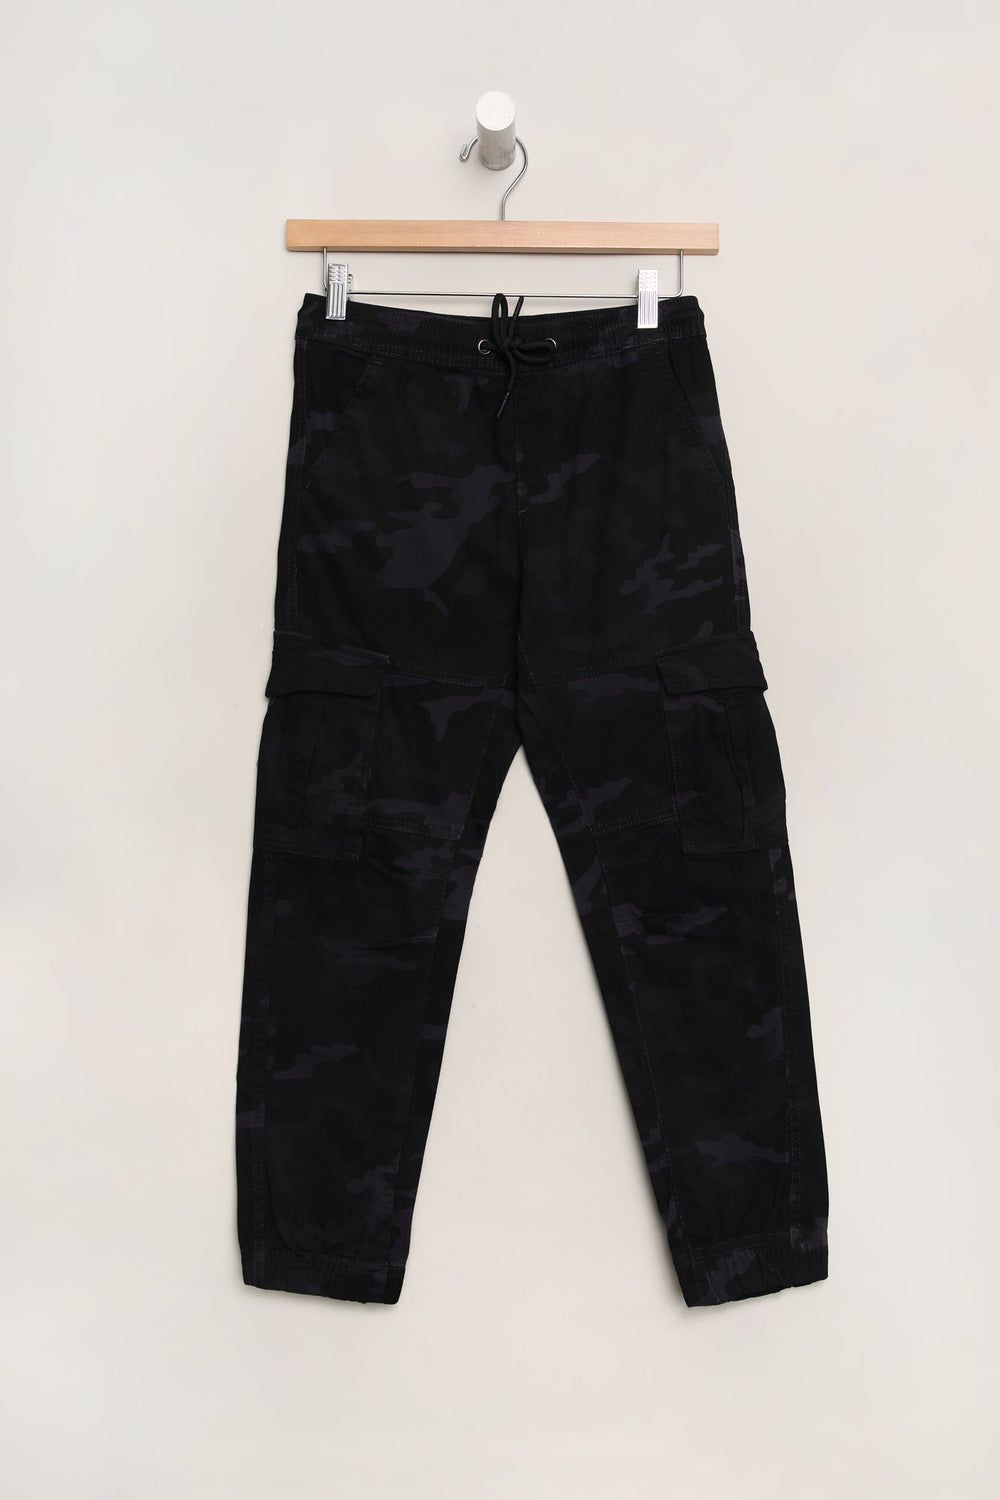 West49 Youth Camo Twill Cargo Jogger West49 Youth Camo Twill Cargo Jogger